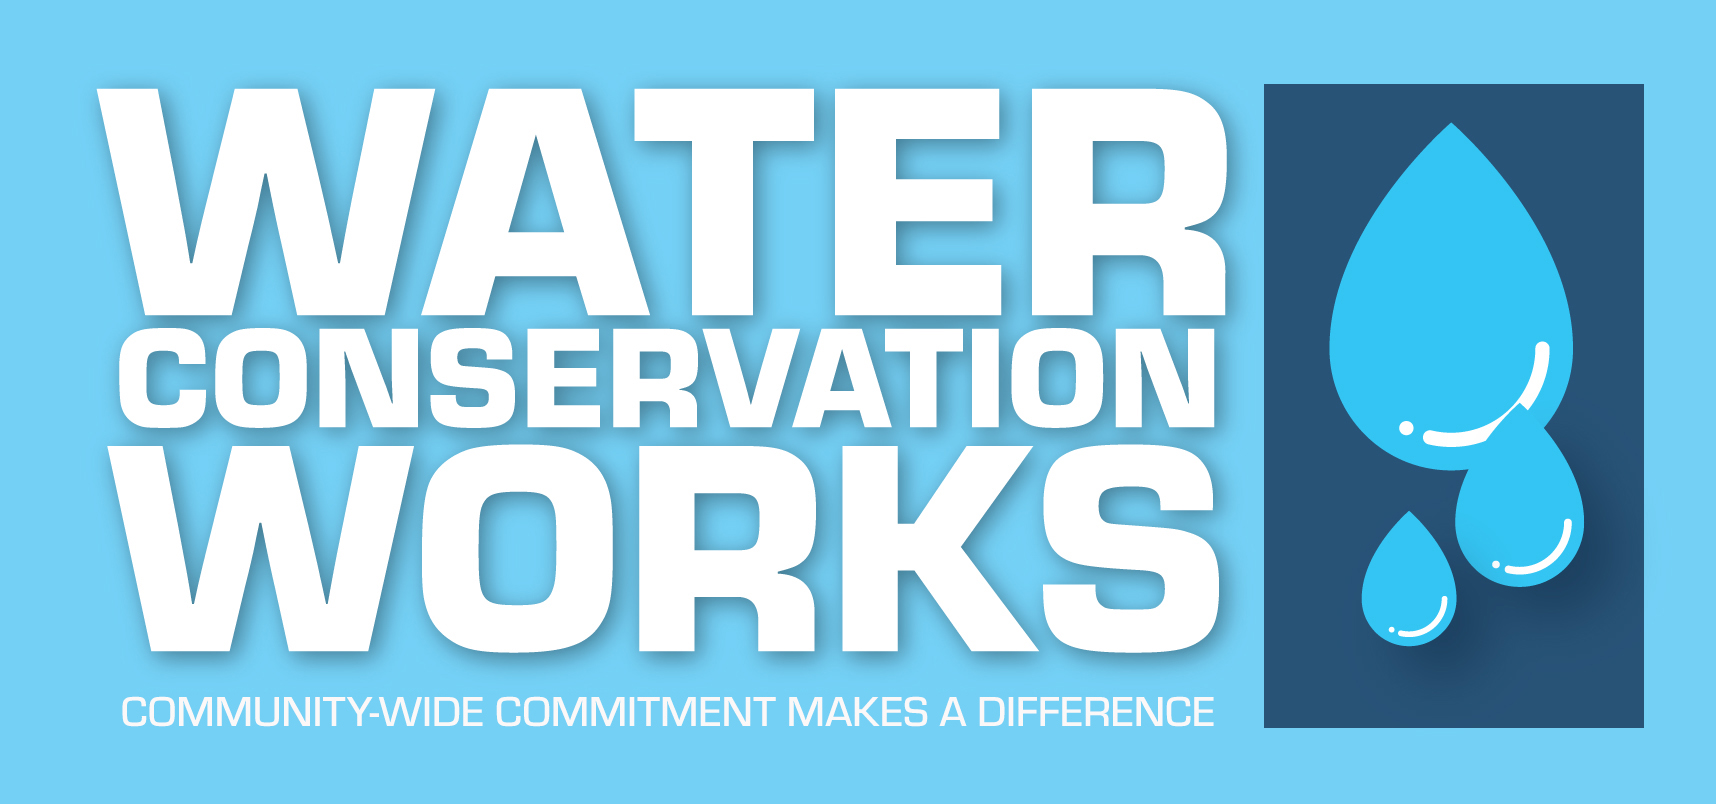 osceola drought and water conservation